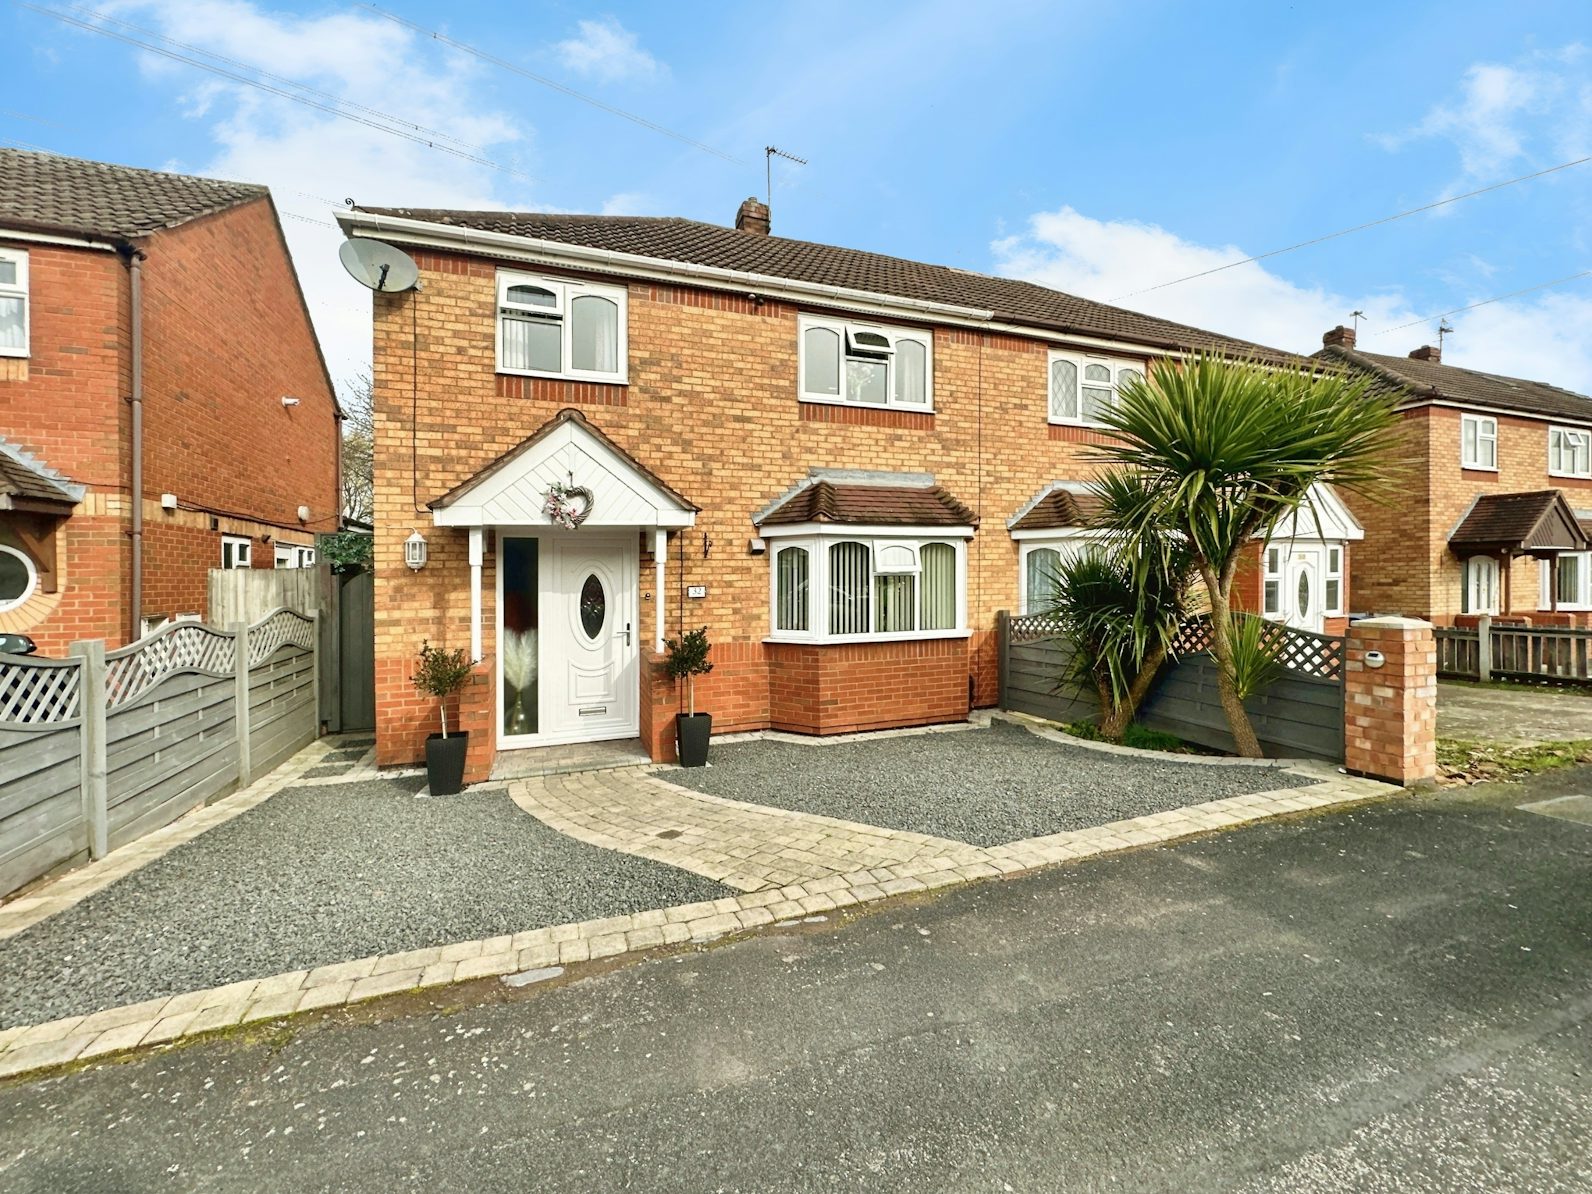 Semi-detached House for sale on Chester Road West Bromwich, B71